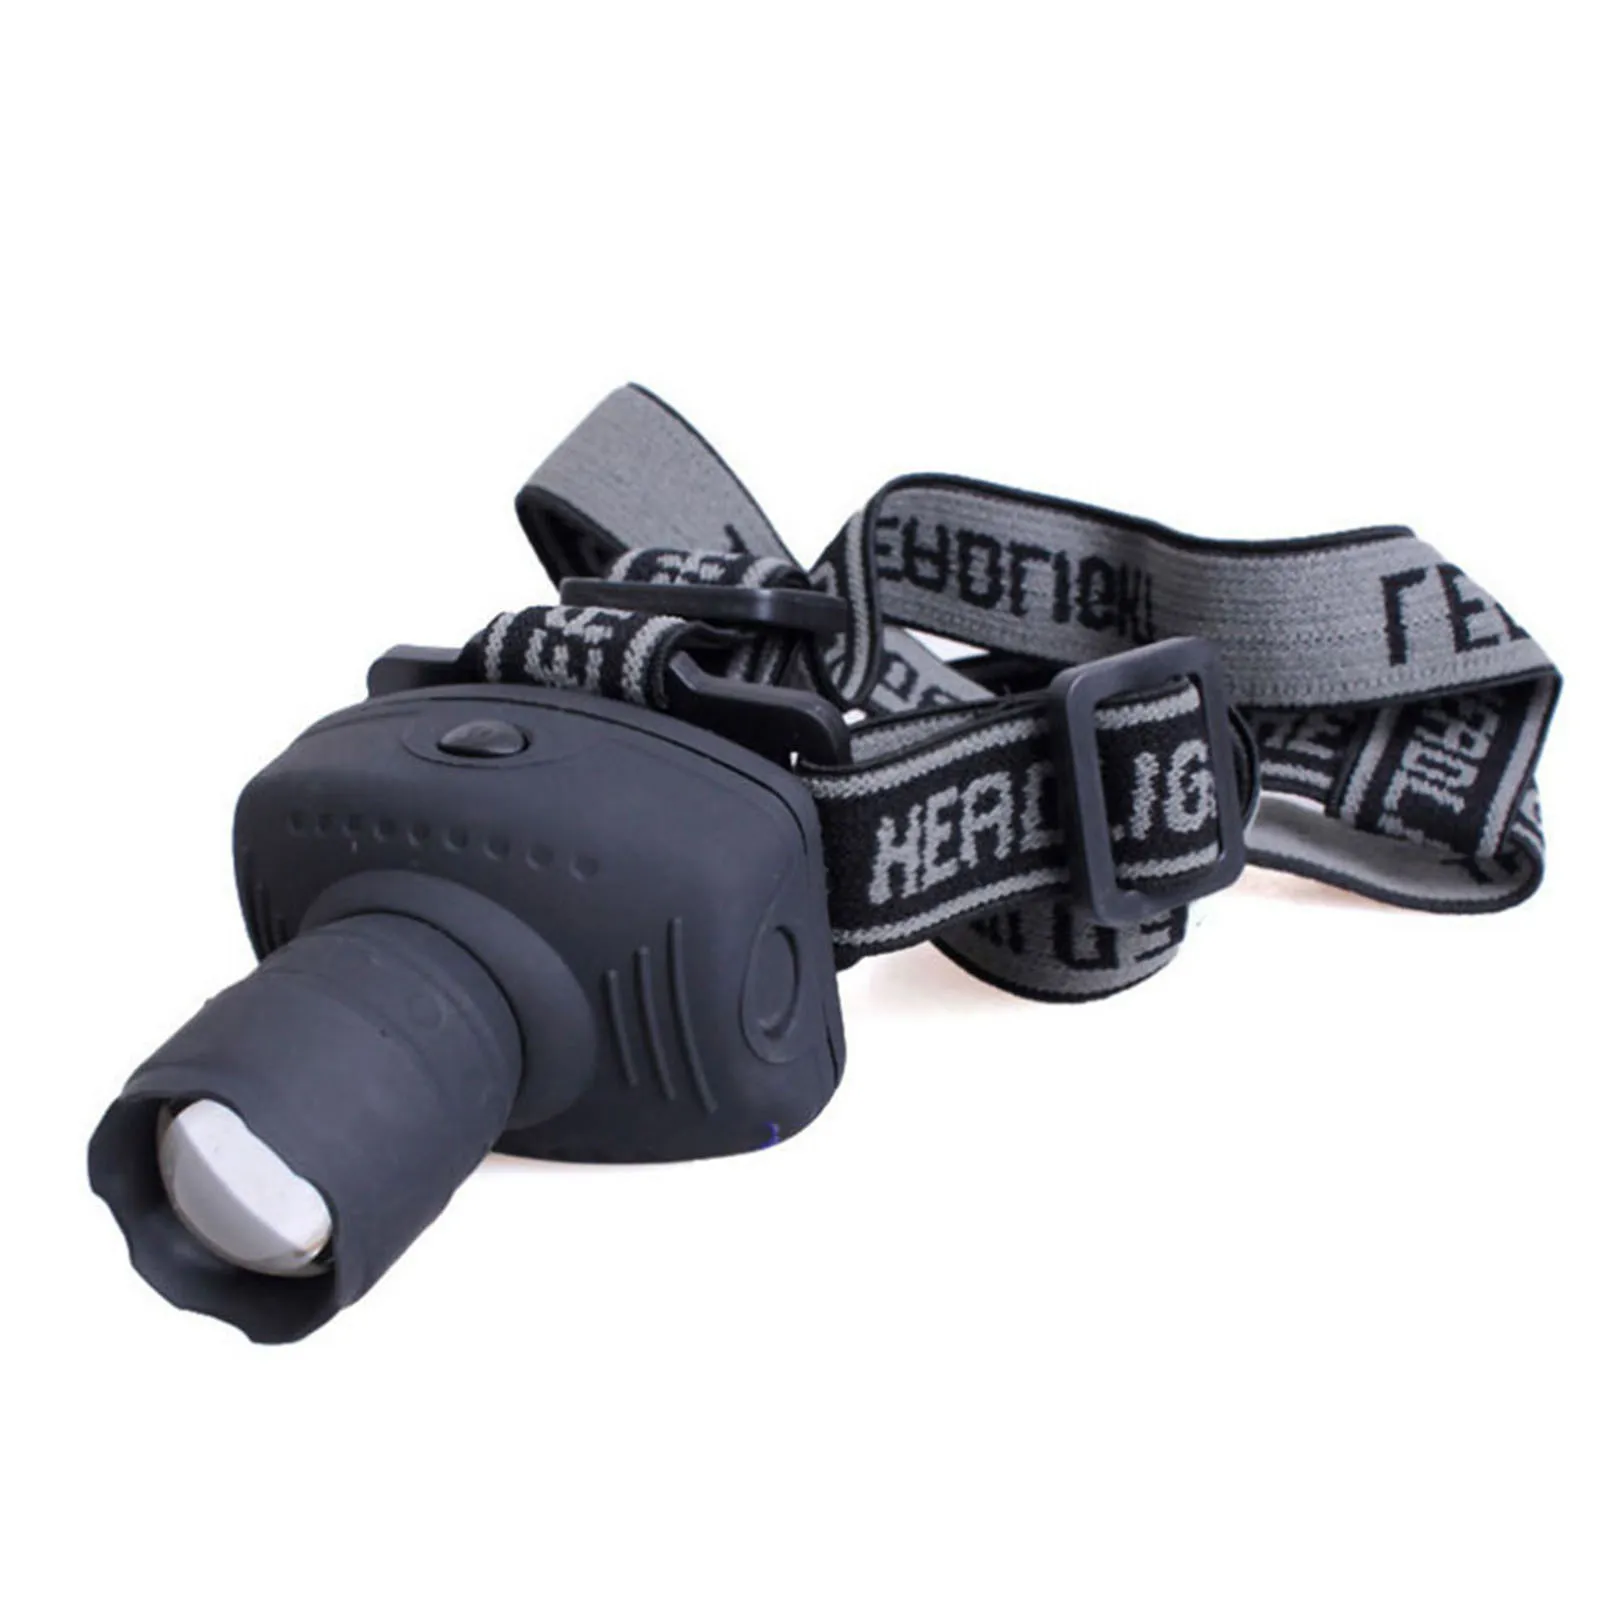 

3W LED Headlamp Flashlights Frontal Lantern Zoomable Head Torch Light for Night Flying Sailing Caving